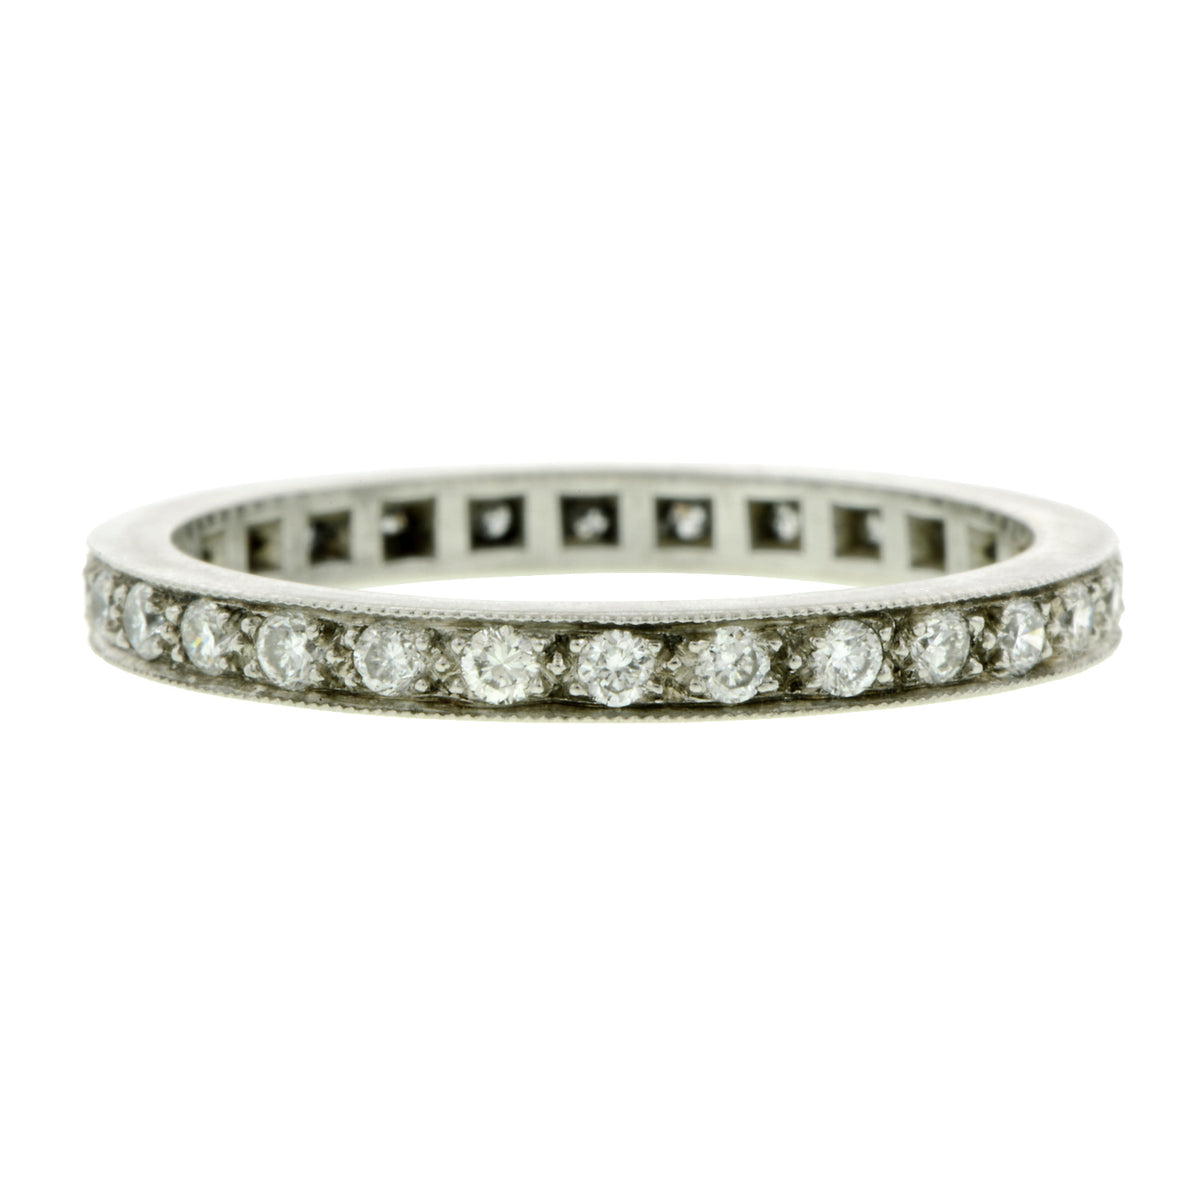 Bead Set Diamond Eternity Wedding Band Ring sold by Doyle & Doyle vintage and antique jewelry boutique.